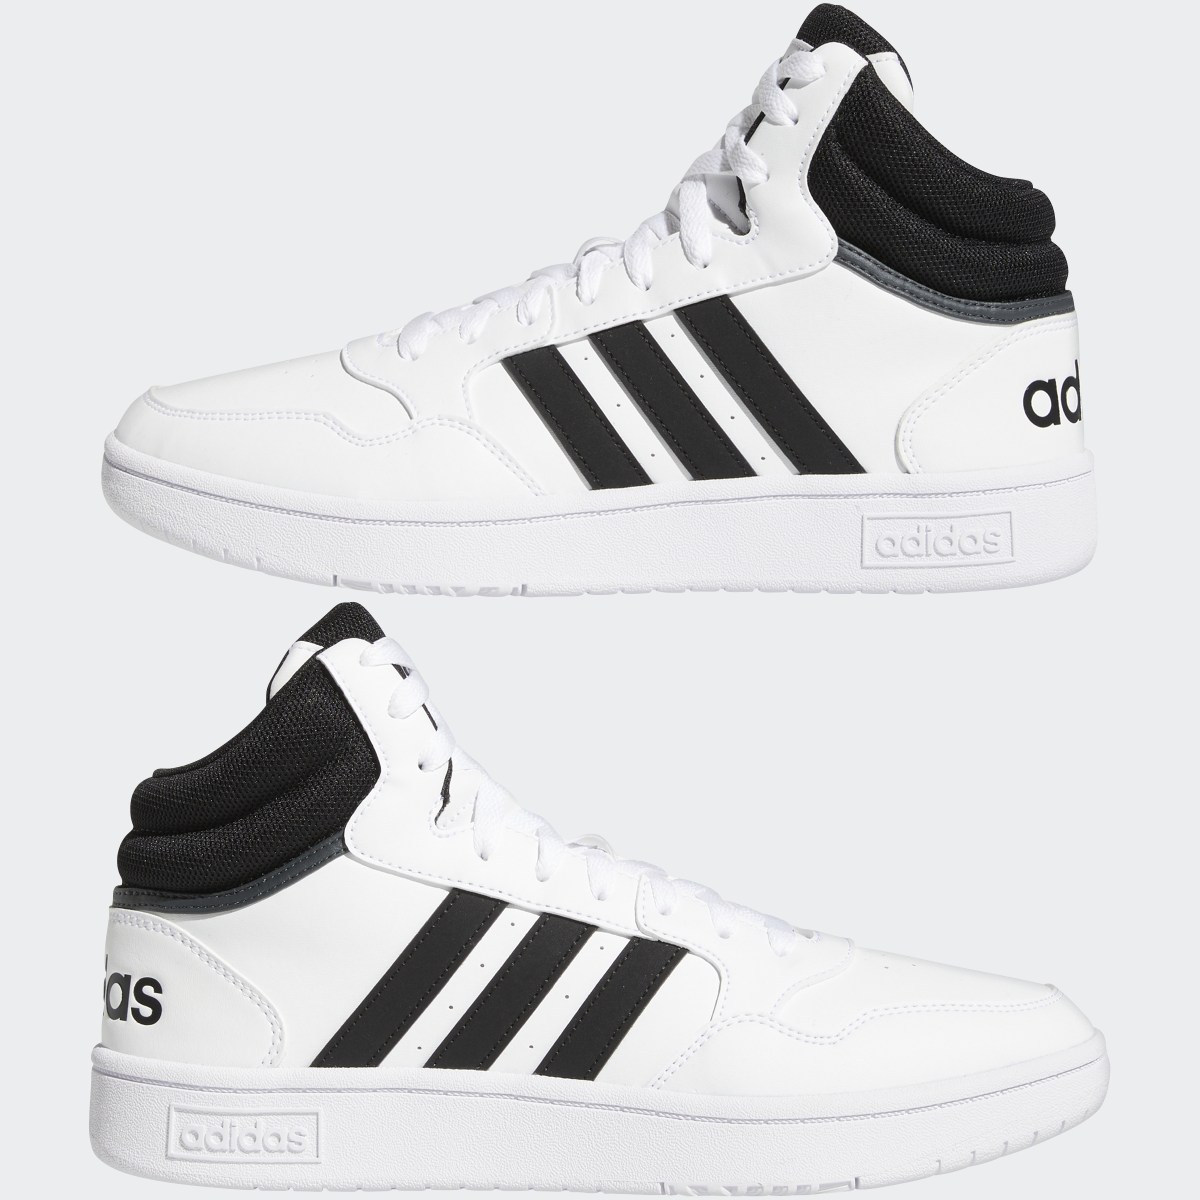 Adidas Chaussure Hoops 3.0 Mid Classic Vintage. 8